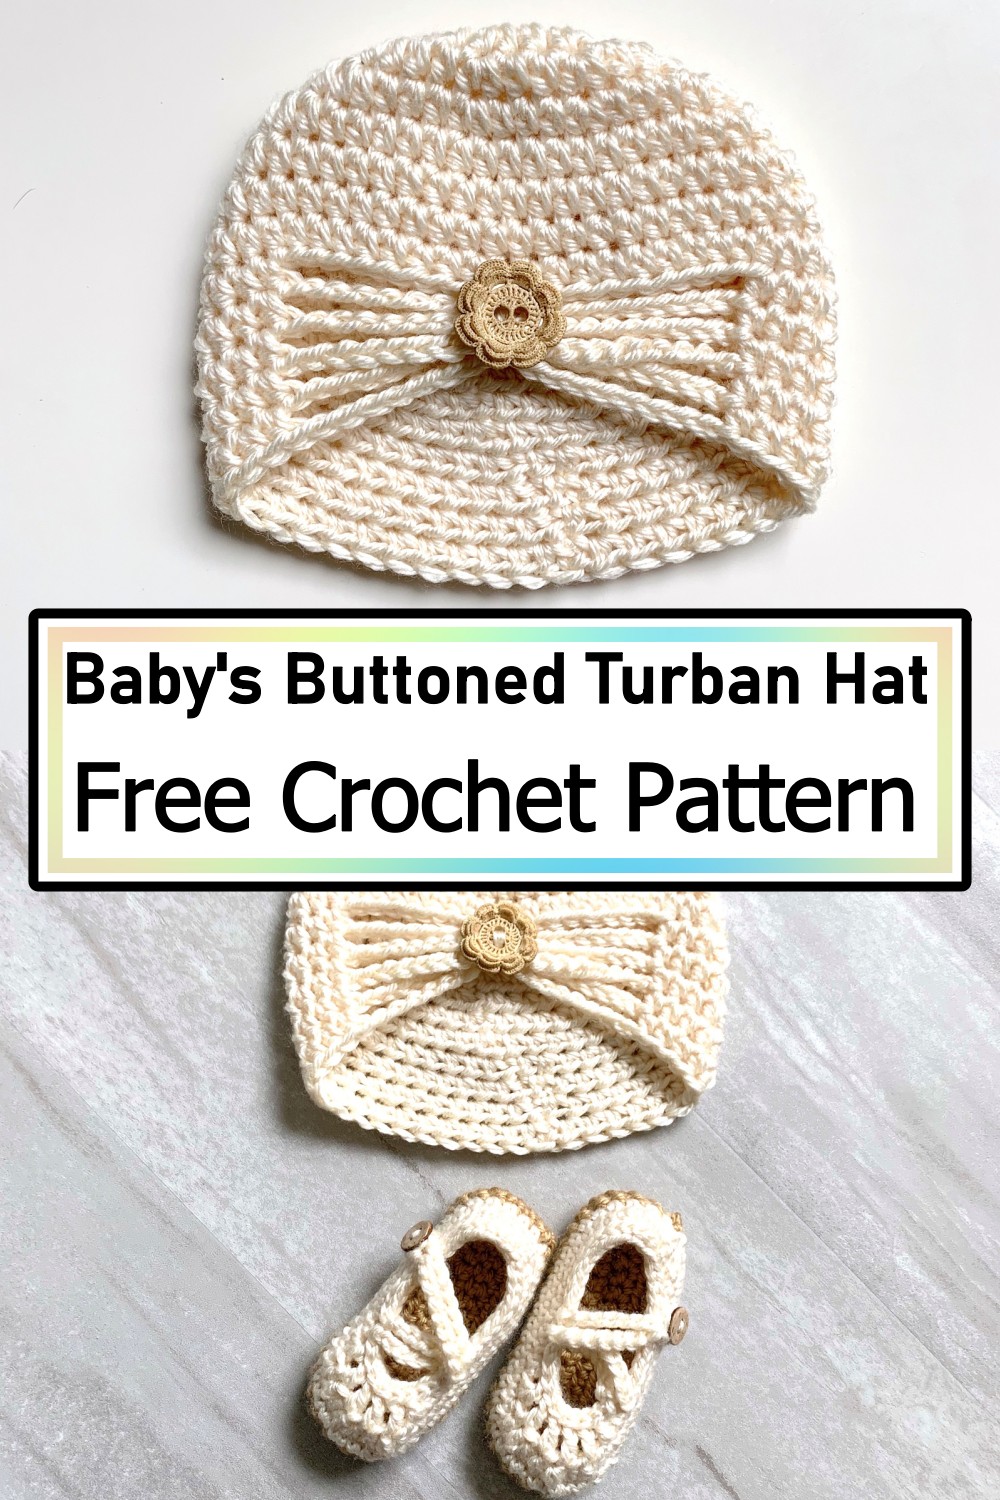 Baby's Buttoned Turban Hat